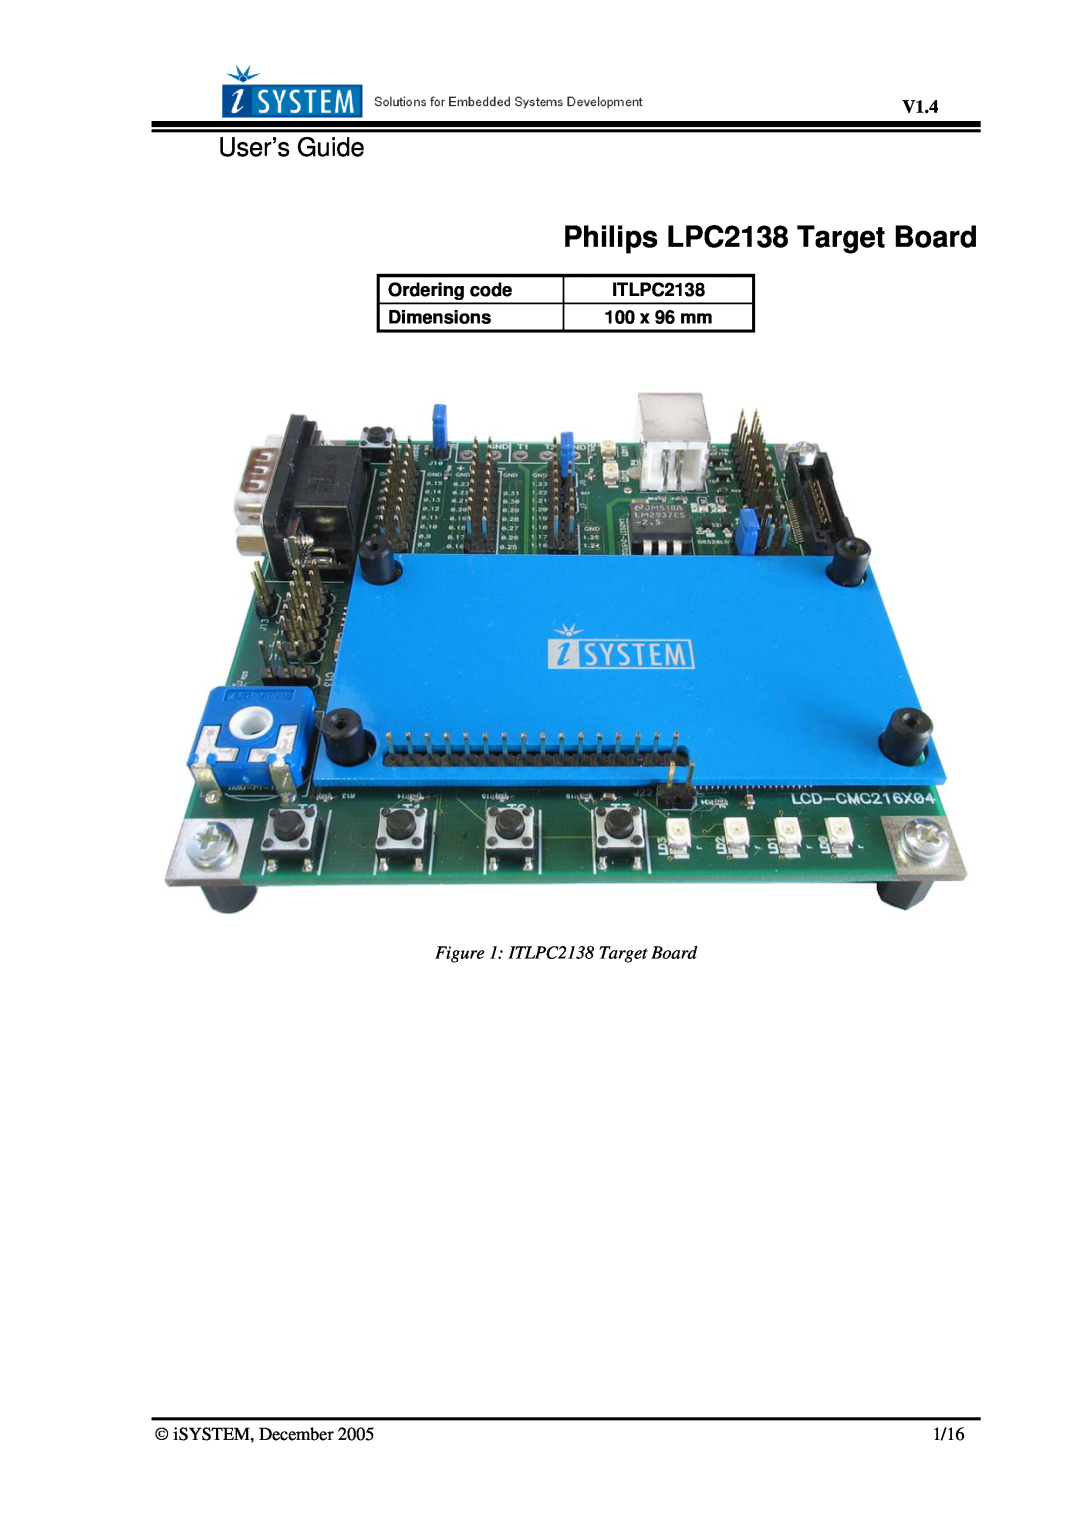 Philips dimensions User’s Guide, Philips LPC2138 Target Board, V1.4, Ordering code, ITLPC2138, Dimensions, 100 x 96 mm 